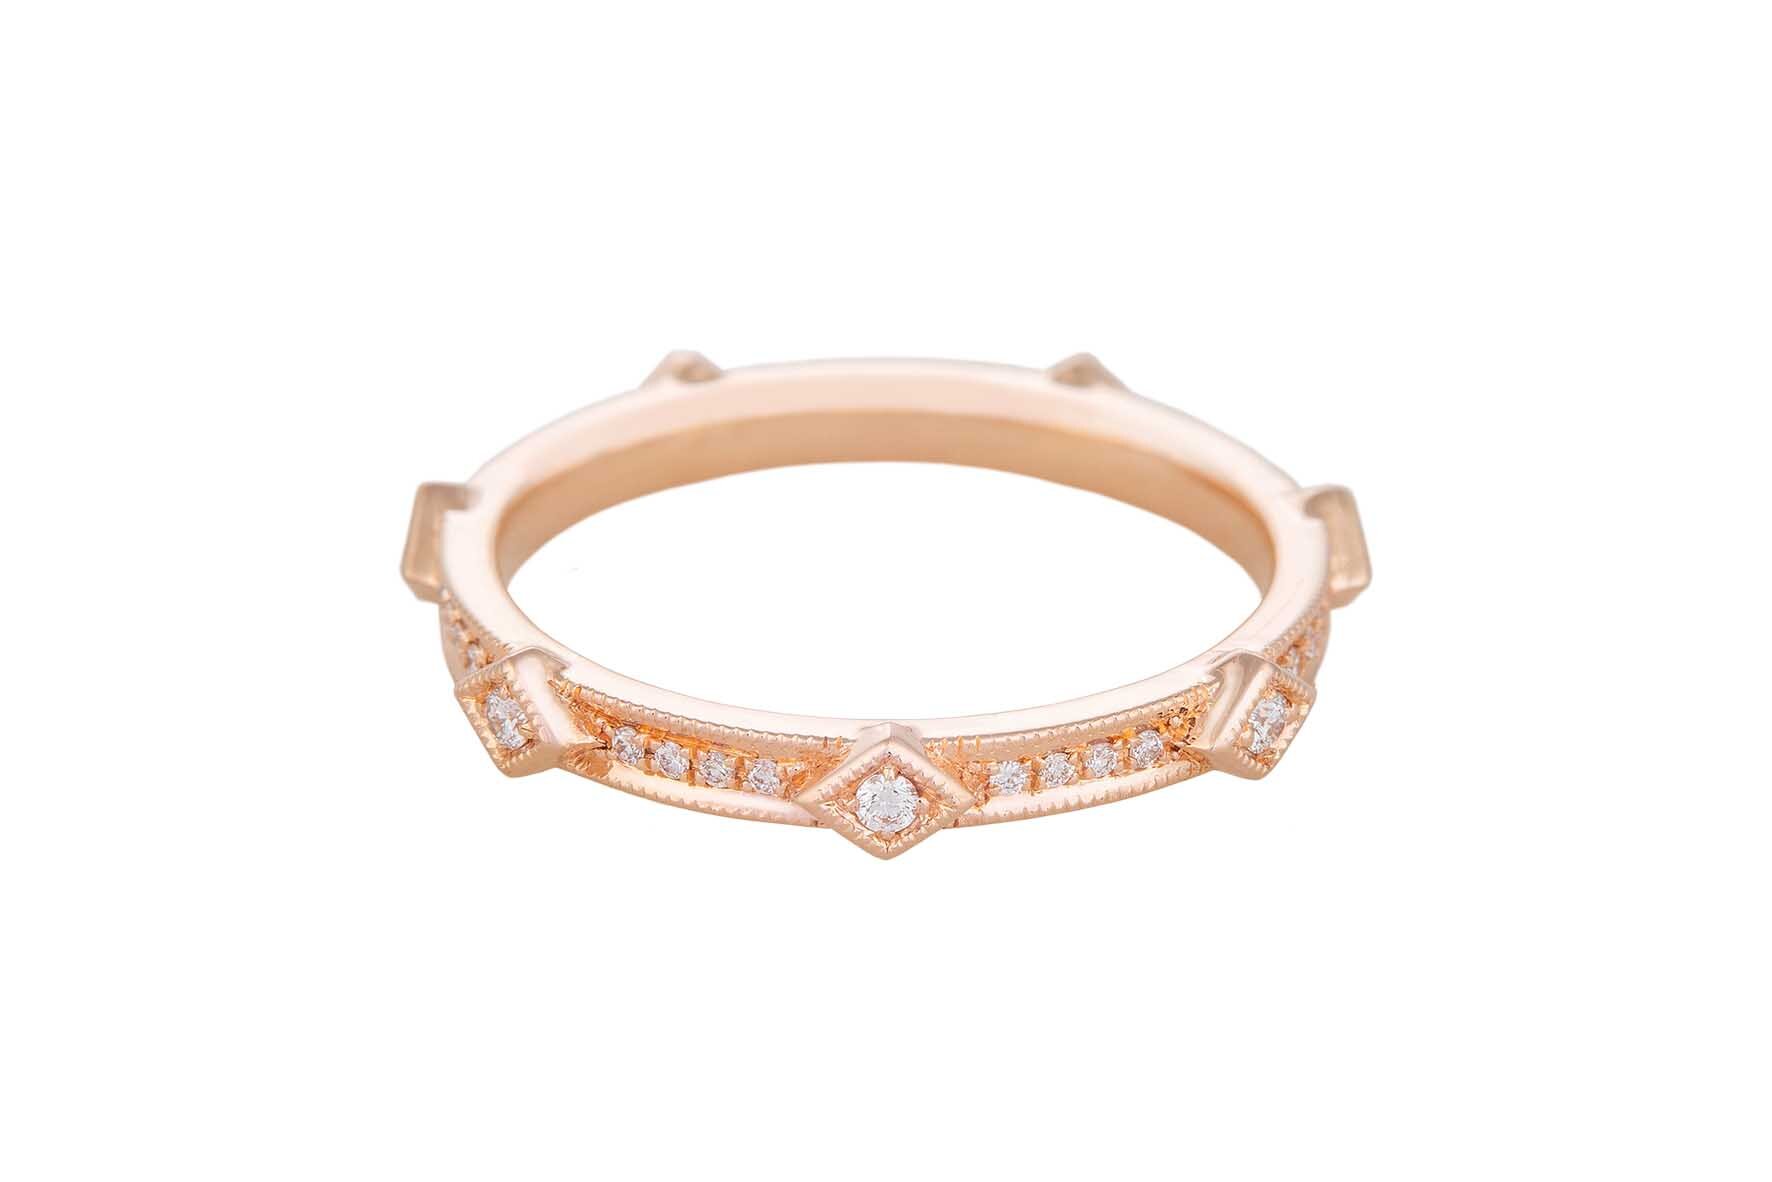 Wedding Band in Rose Gold and White Diamonds